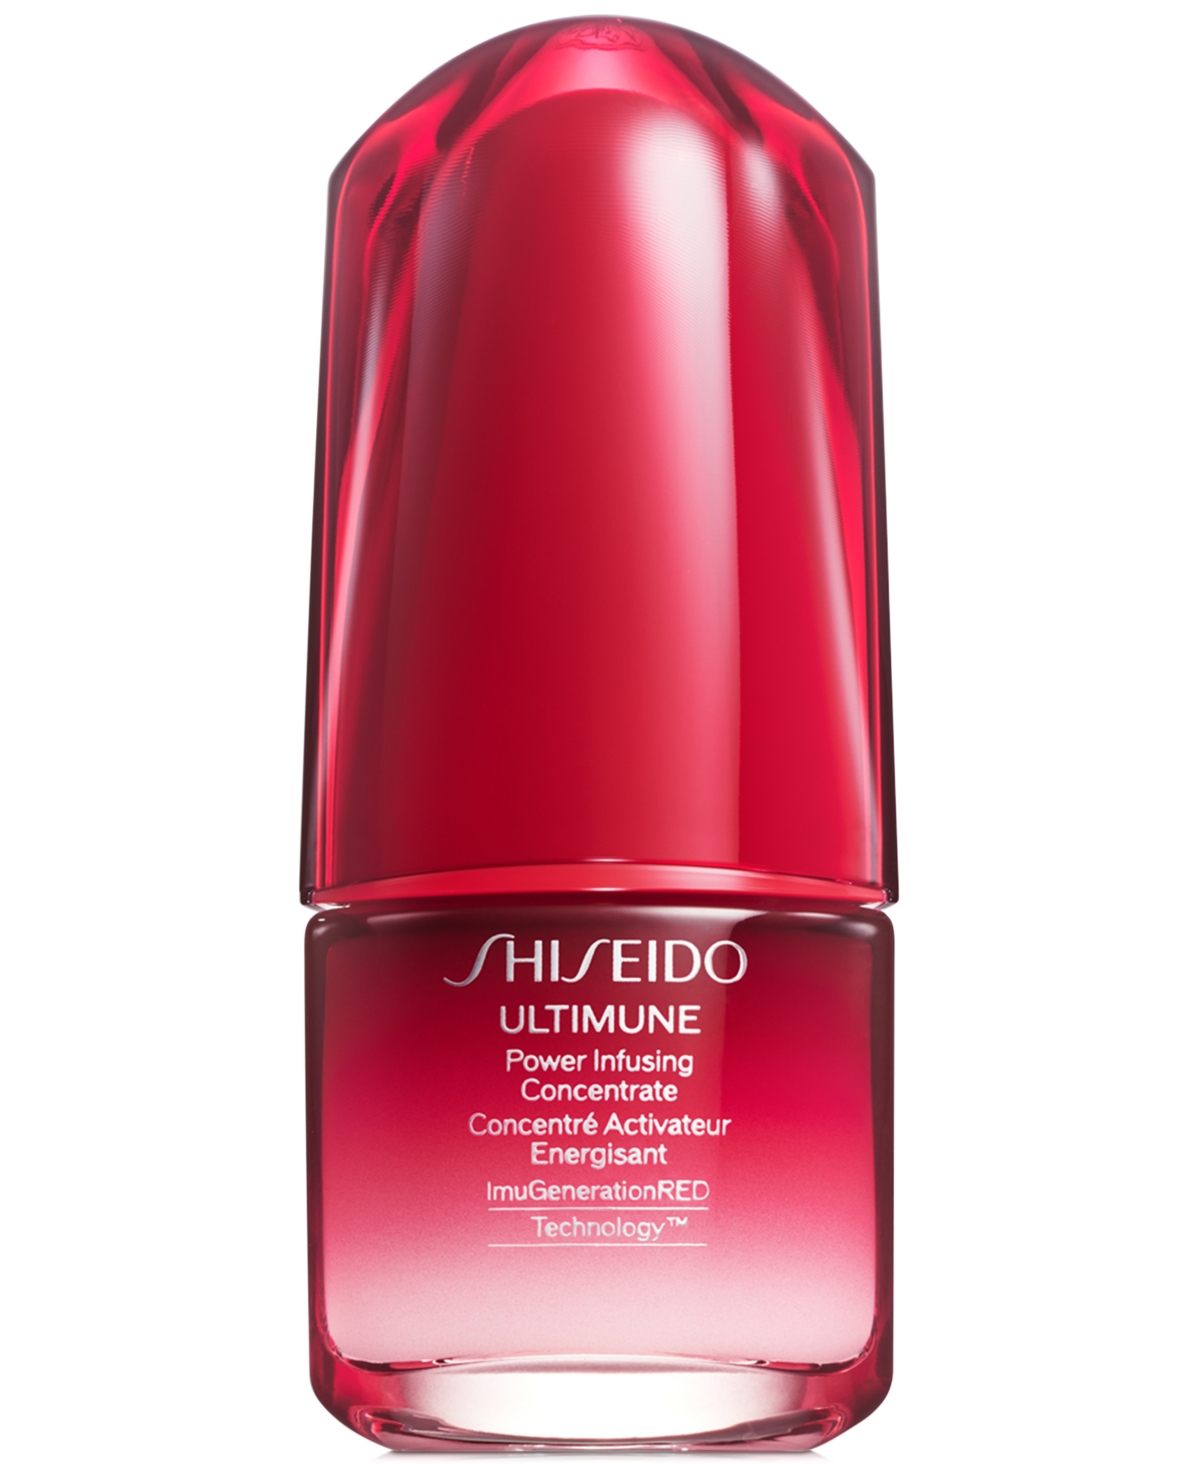 Ultimune концентрат шисейдо Power infusing. Shiseido Ultimune концентрат. Shiseido Ultimune оригинал отличие. Ultimate Power infusing Concentrate 3.0.